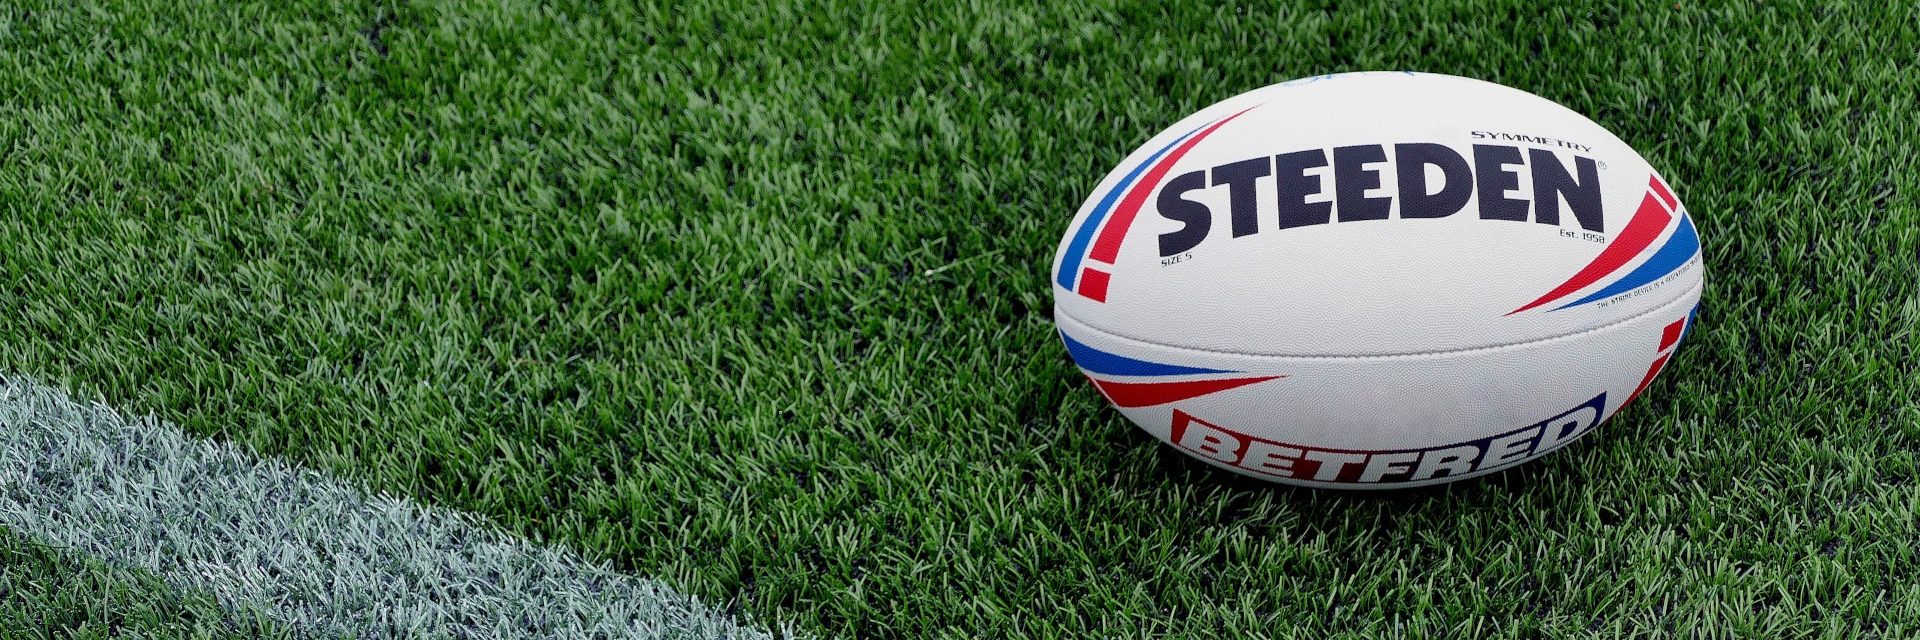 Trans women banned from Rugby league